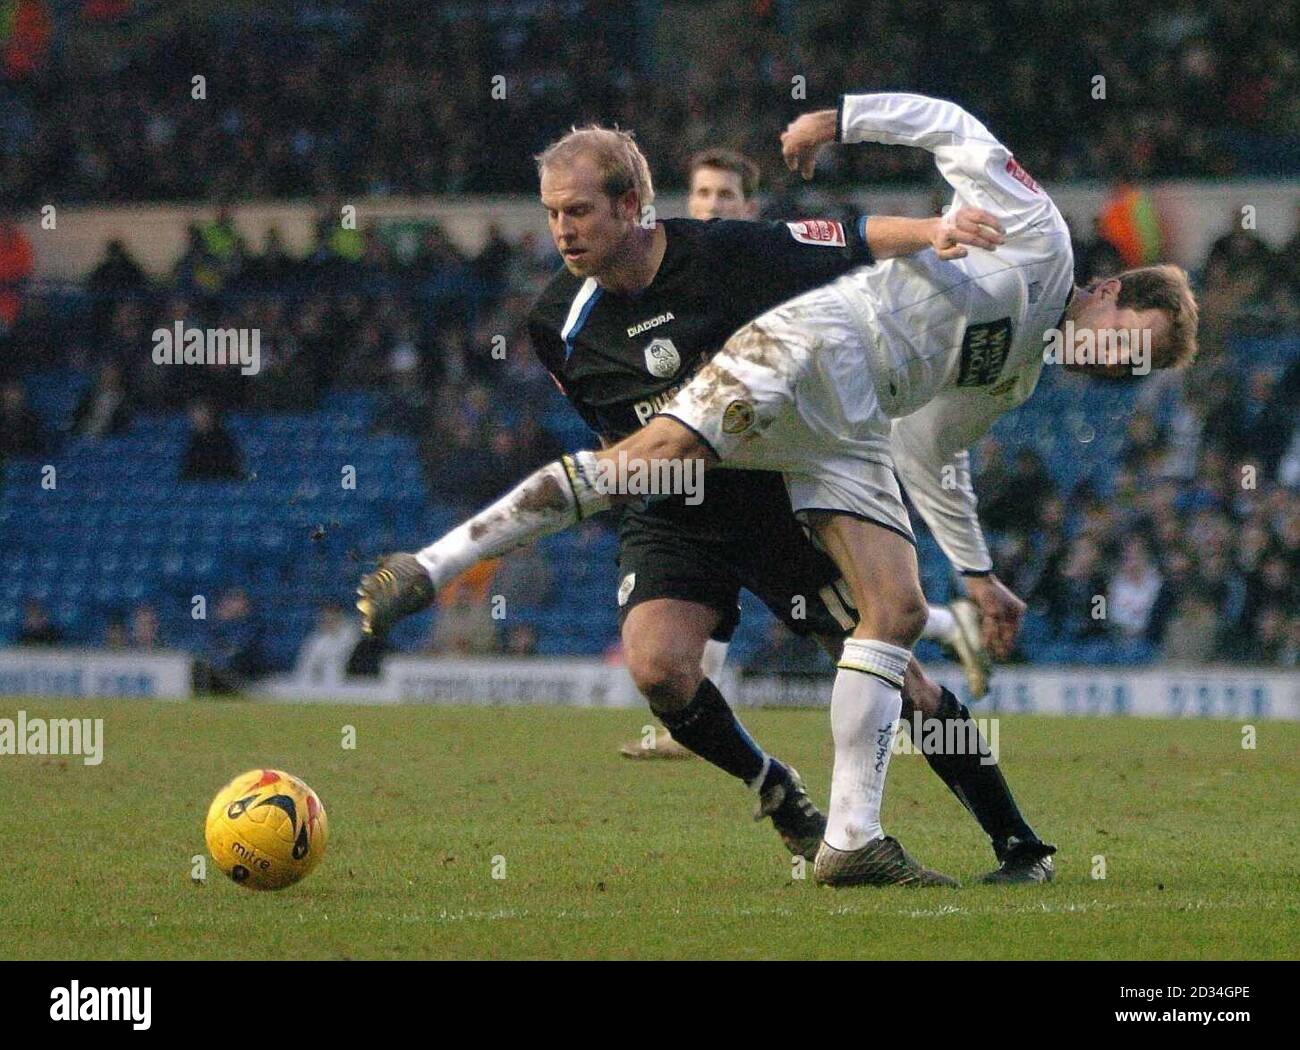 Leeds' Eddie Lewis (R) tussles with Sheffield Wednesday's John Hills during the Coca-Cola Championship match at Elland Road, Leeds, Saturday January 21, 2006. PRESS ASSOCIATION Photo. Photo credit should read: John Jones/PA THIS PICTURE CAN ONLY BE USED WITHIN THE CONTEXT OF AN EDITORIAL FEATURE. NO UNOFFICIAL CLUB WEBSITE USE. Stock Photo